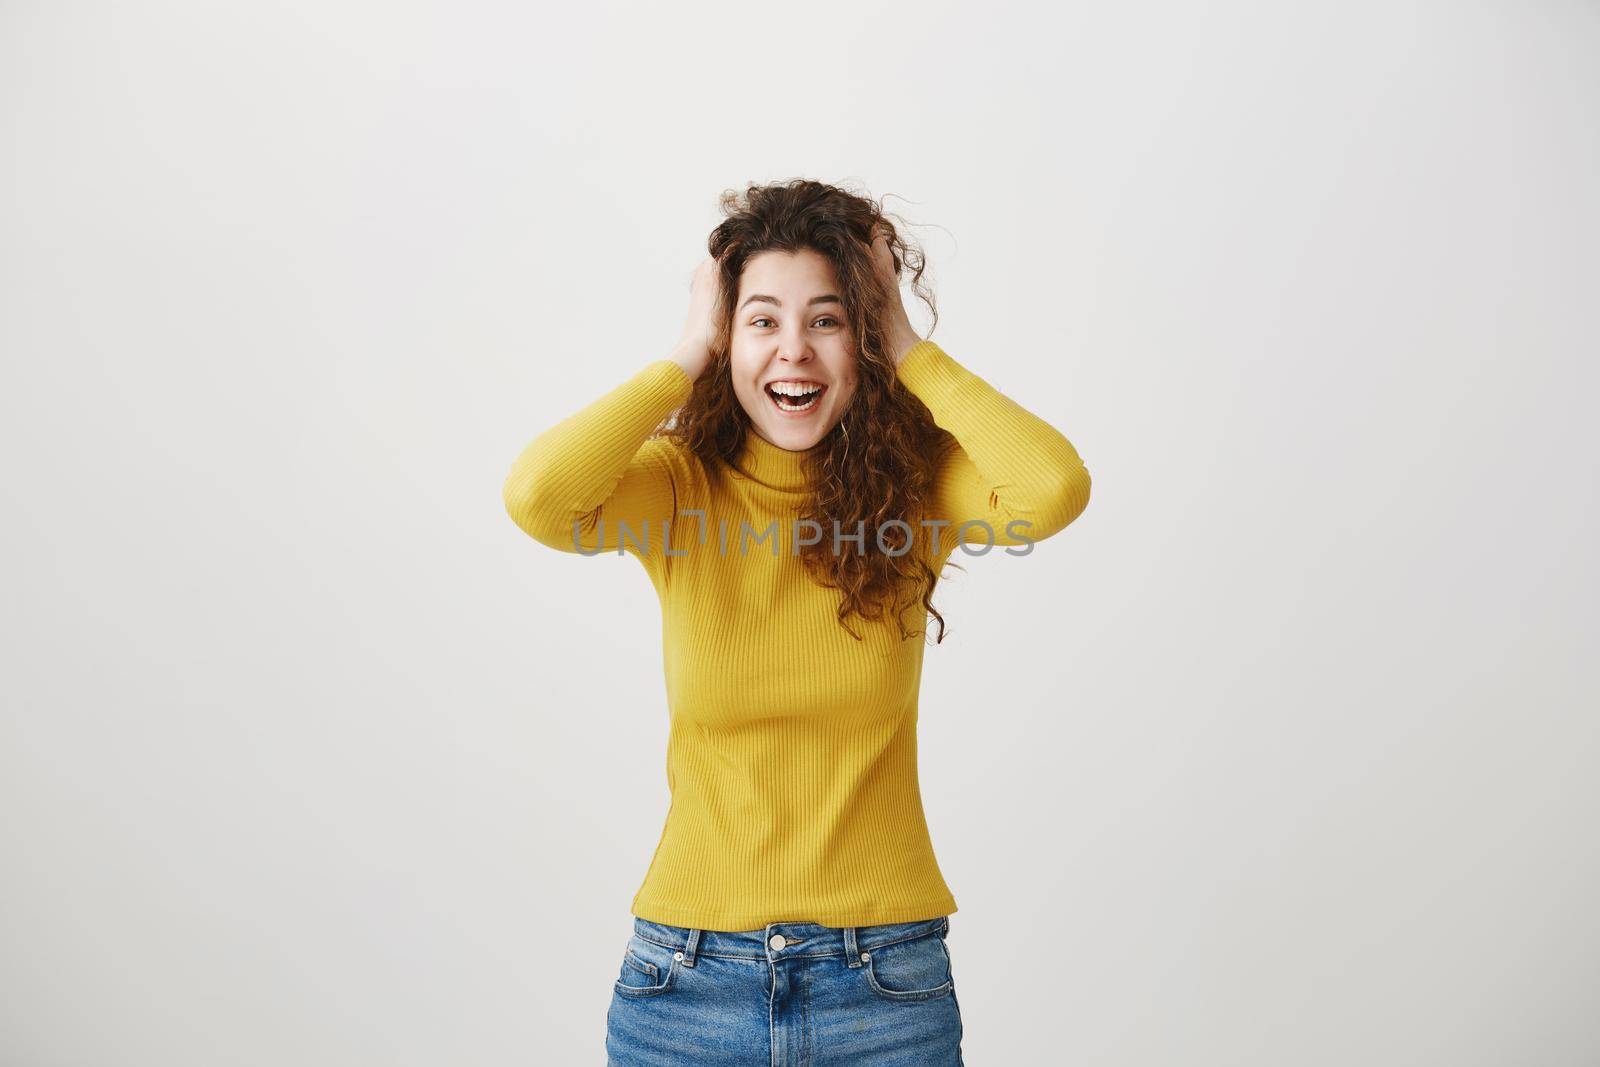 Portrait of beautiful cheerful redhead girl with curly hair smiling laughing looking at camera over white background